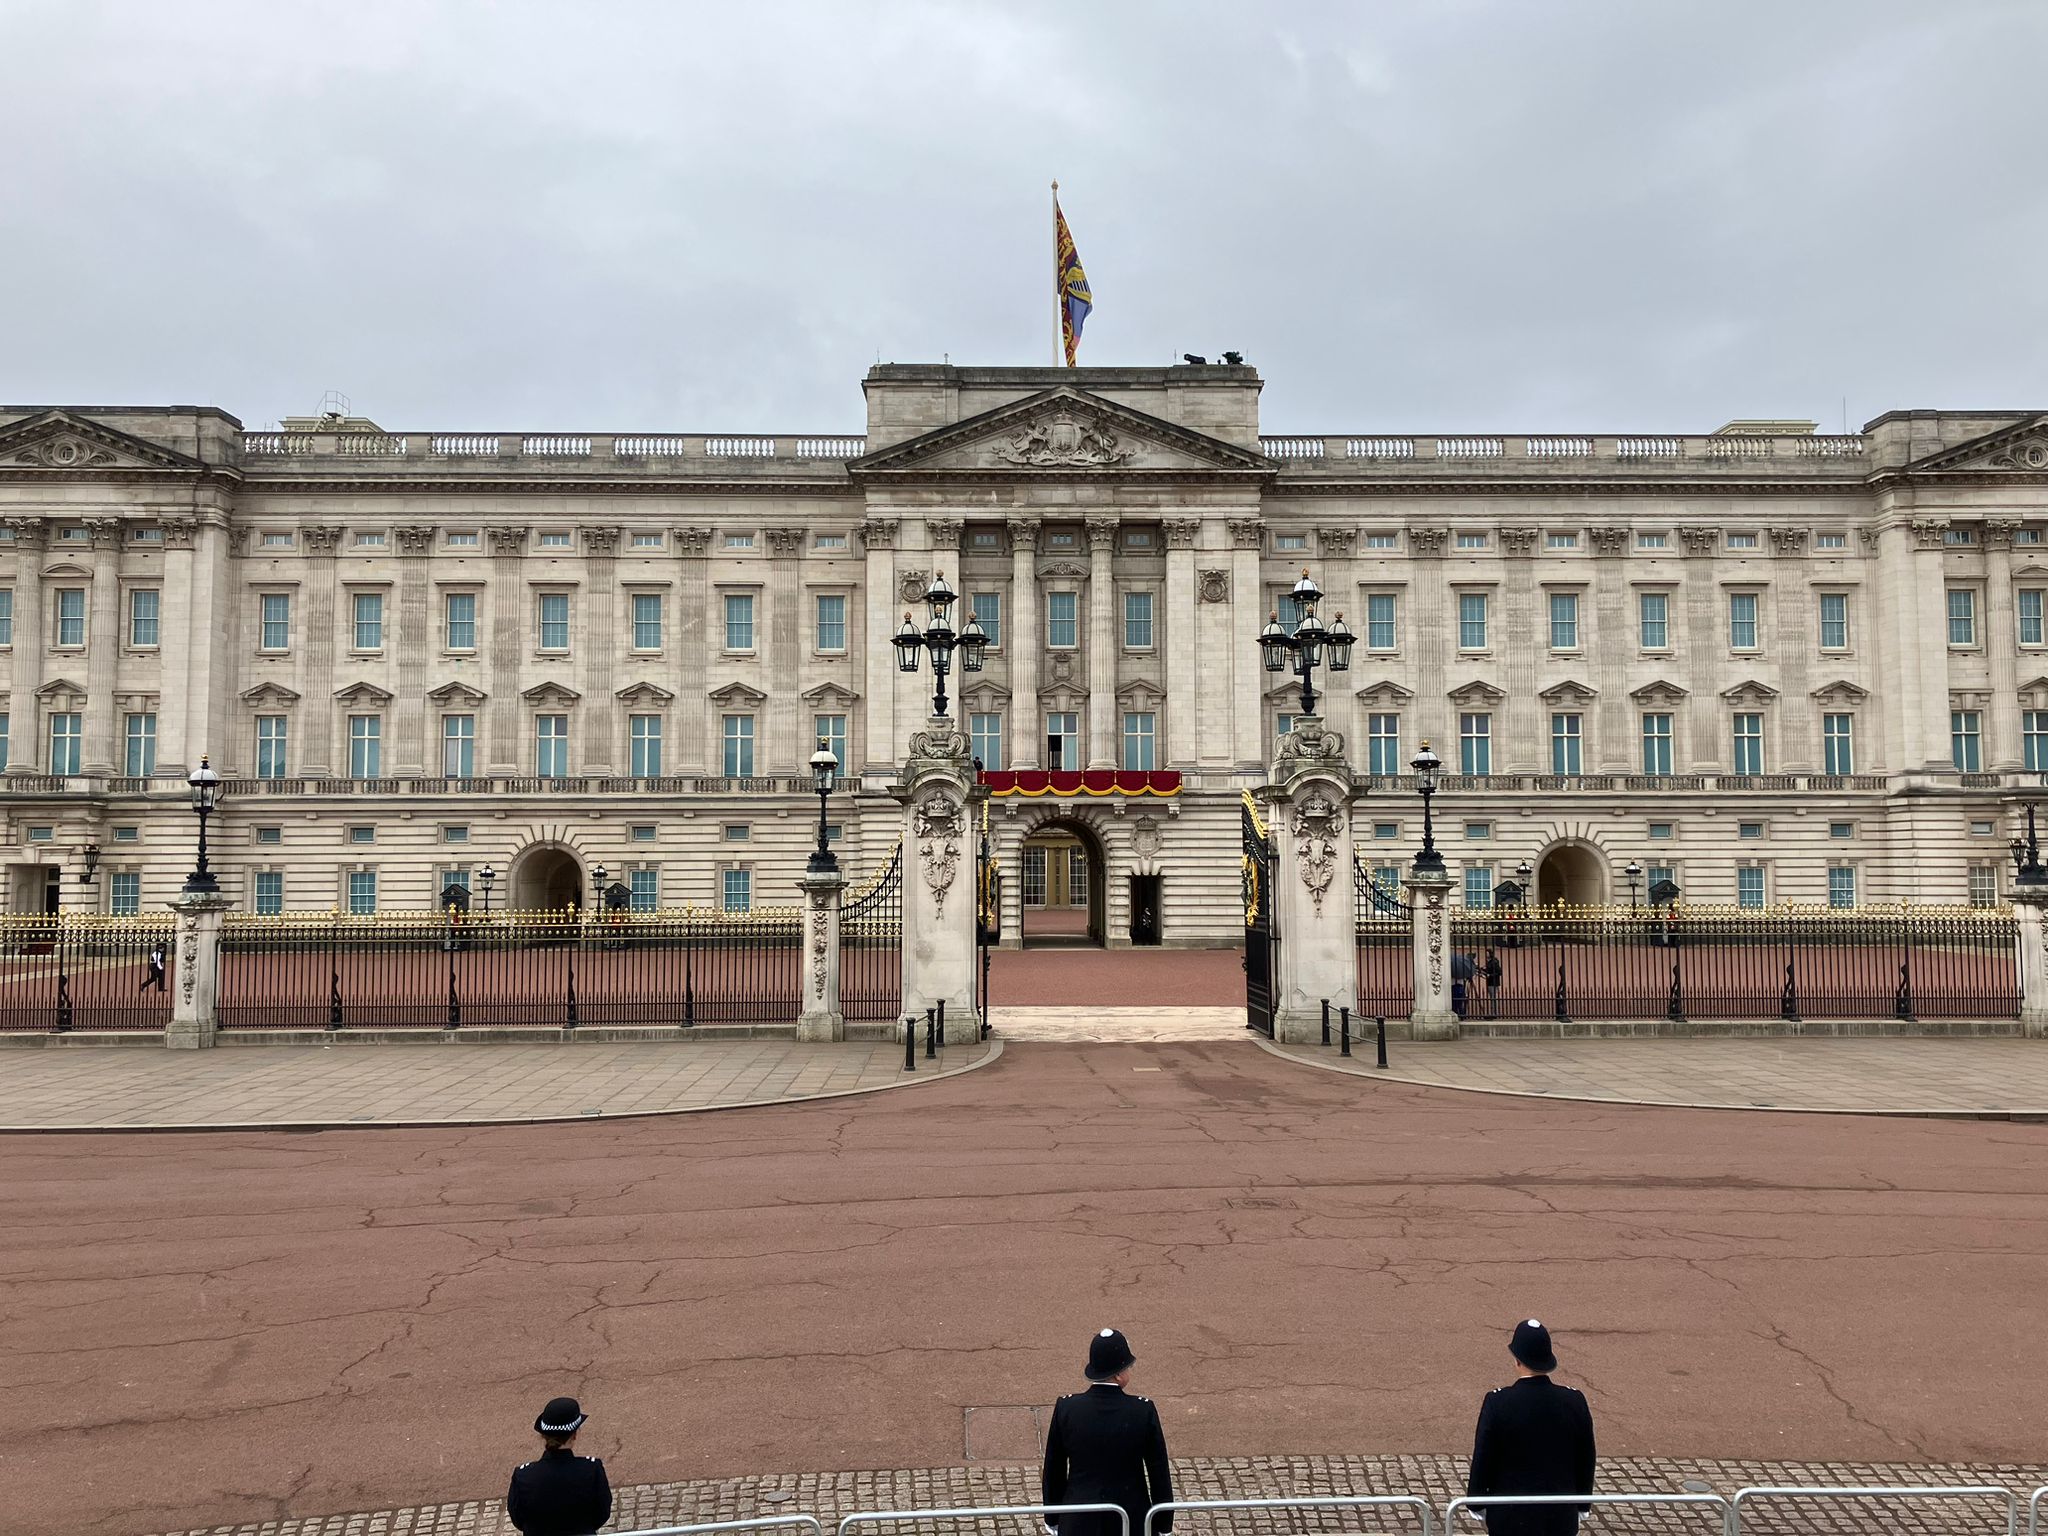 The Royal Standard flies above Buckingham Palace in London on Saturday.